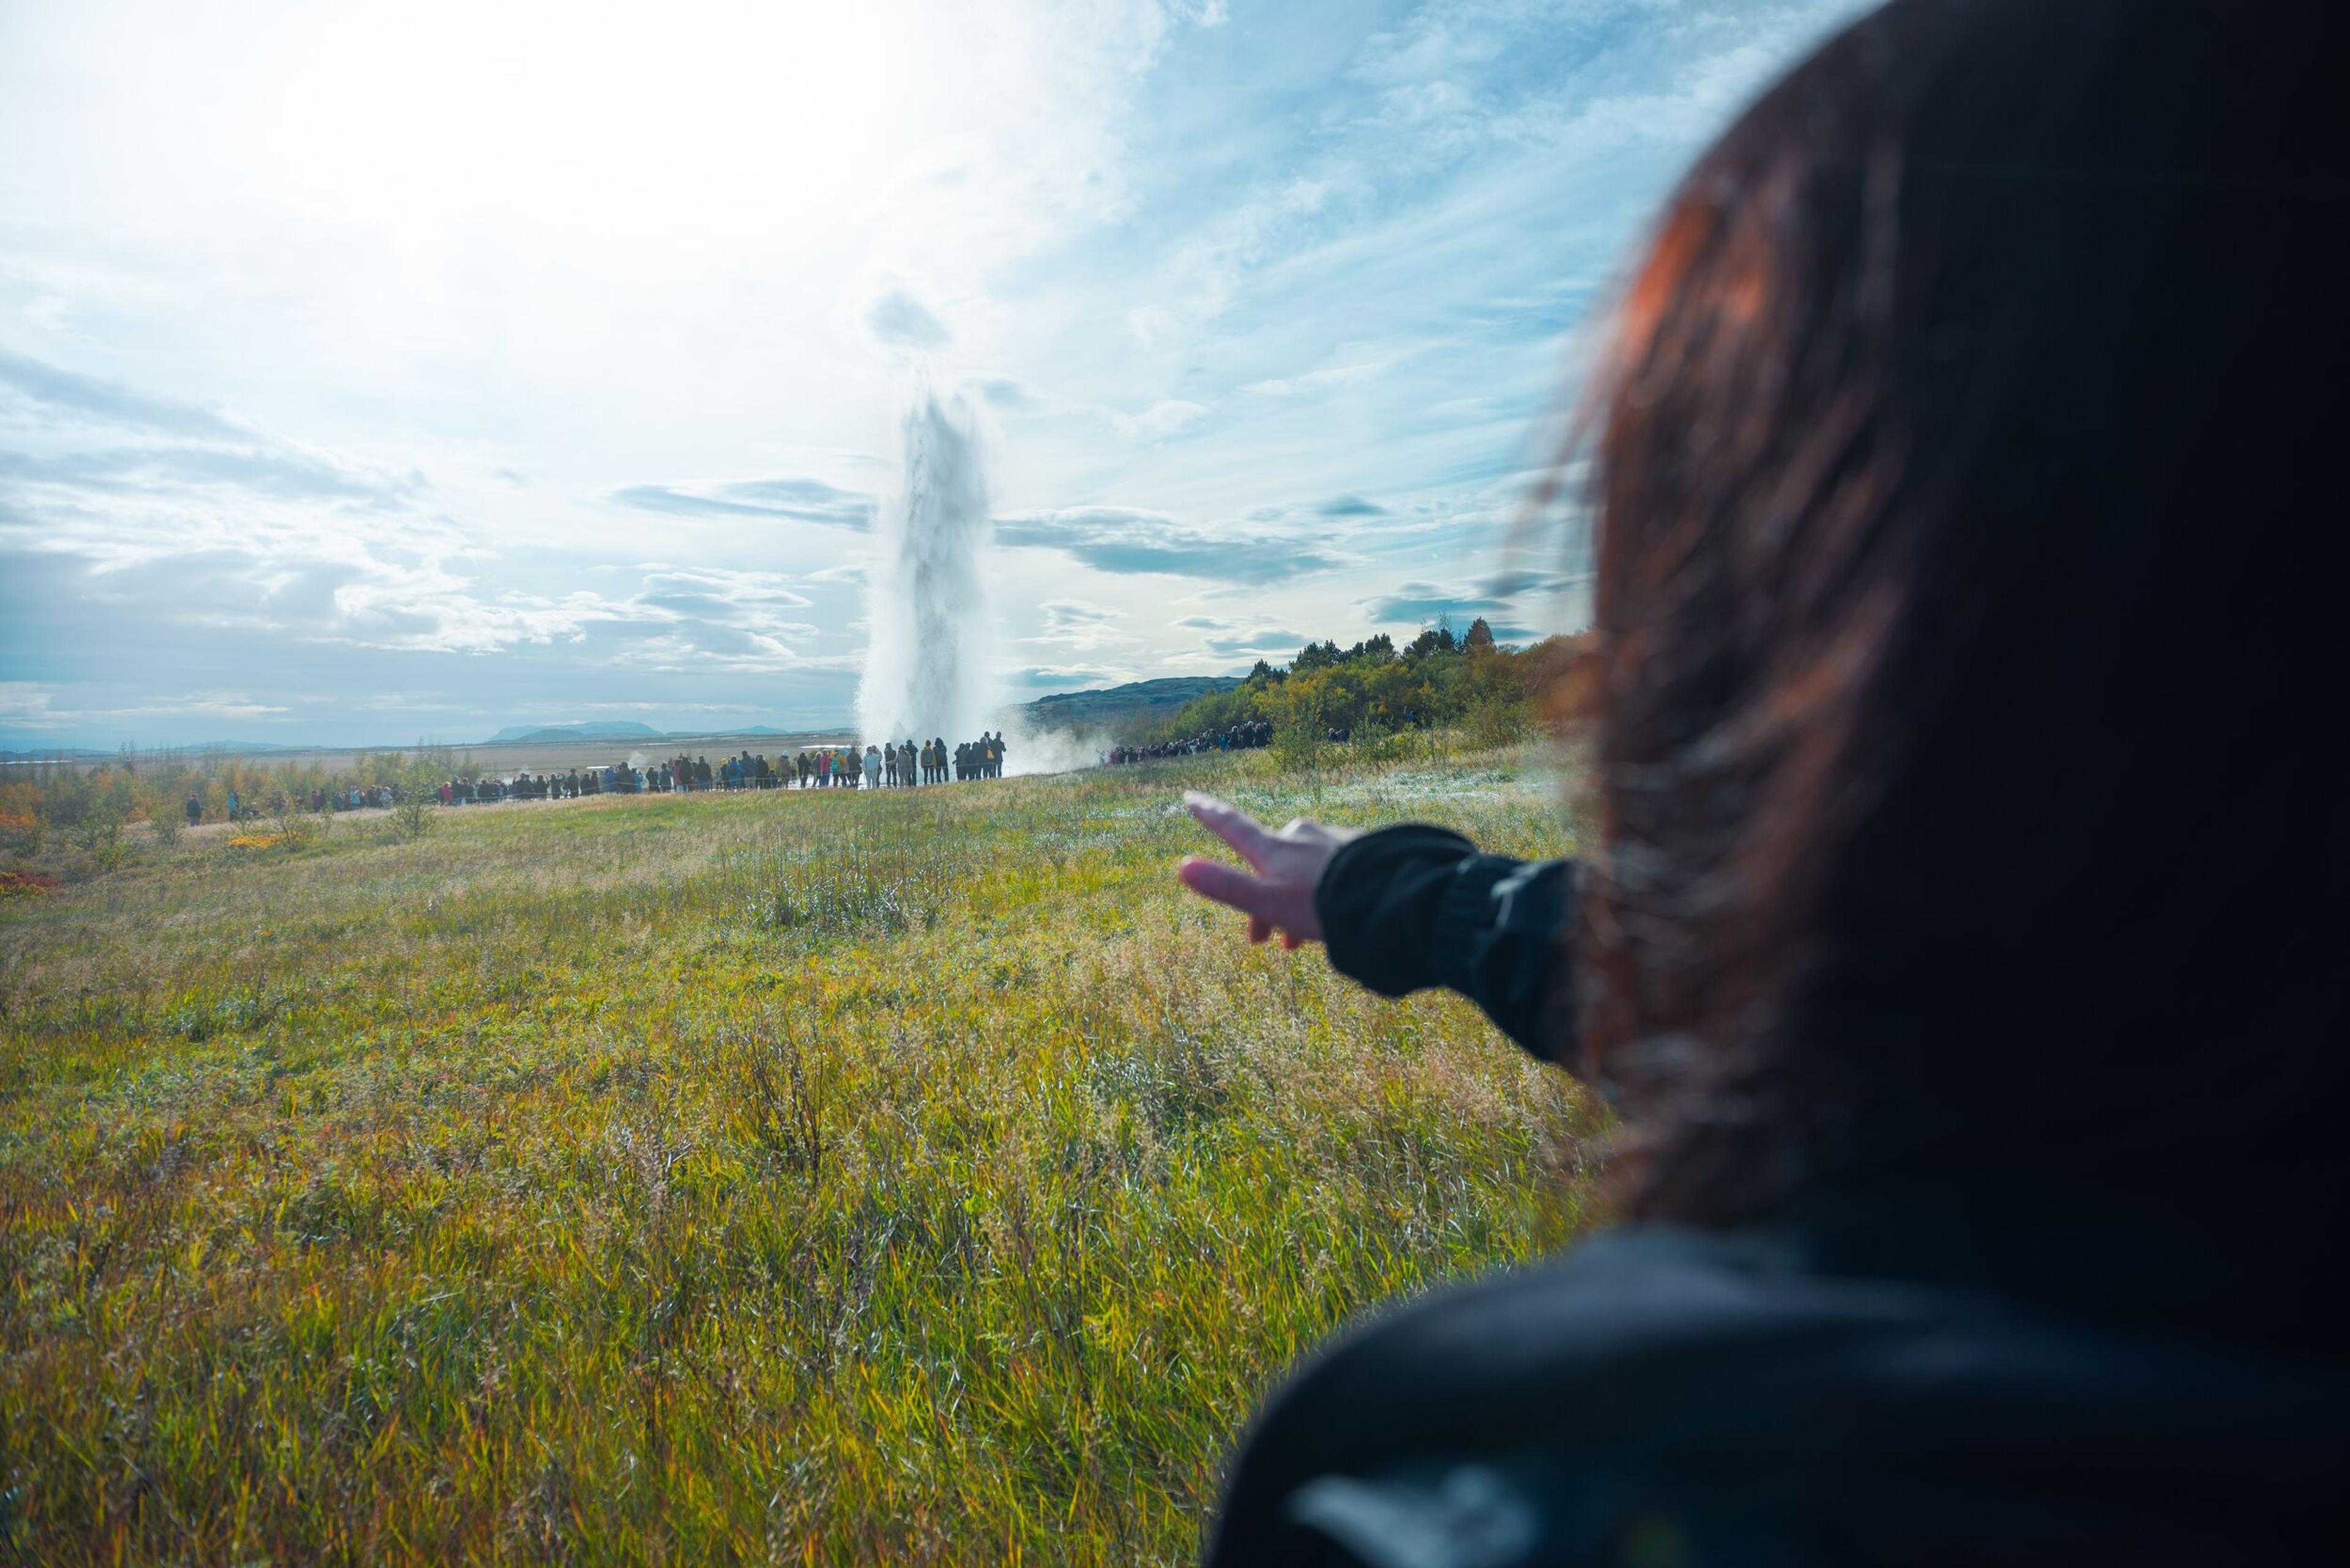 A person is gesturing towards a distant geyser erupting in a grassy field under a blue sky with clouds.